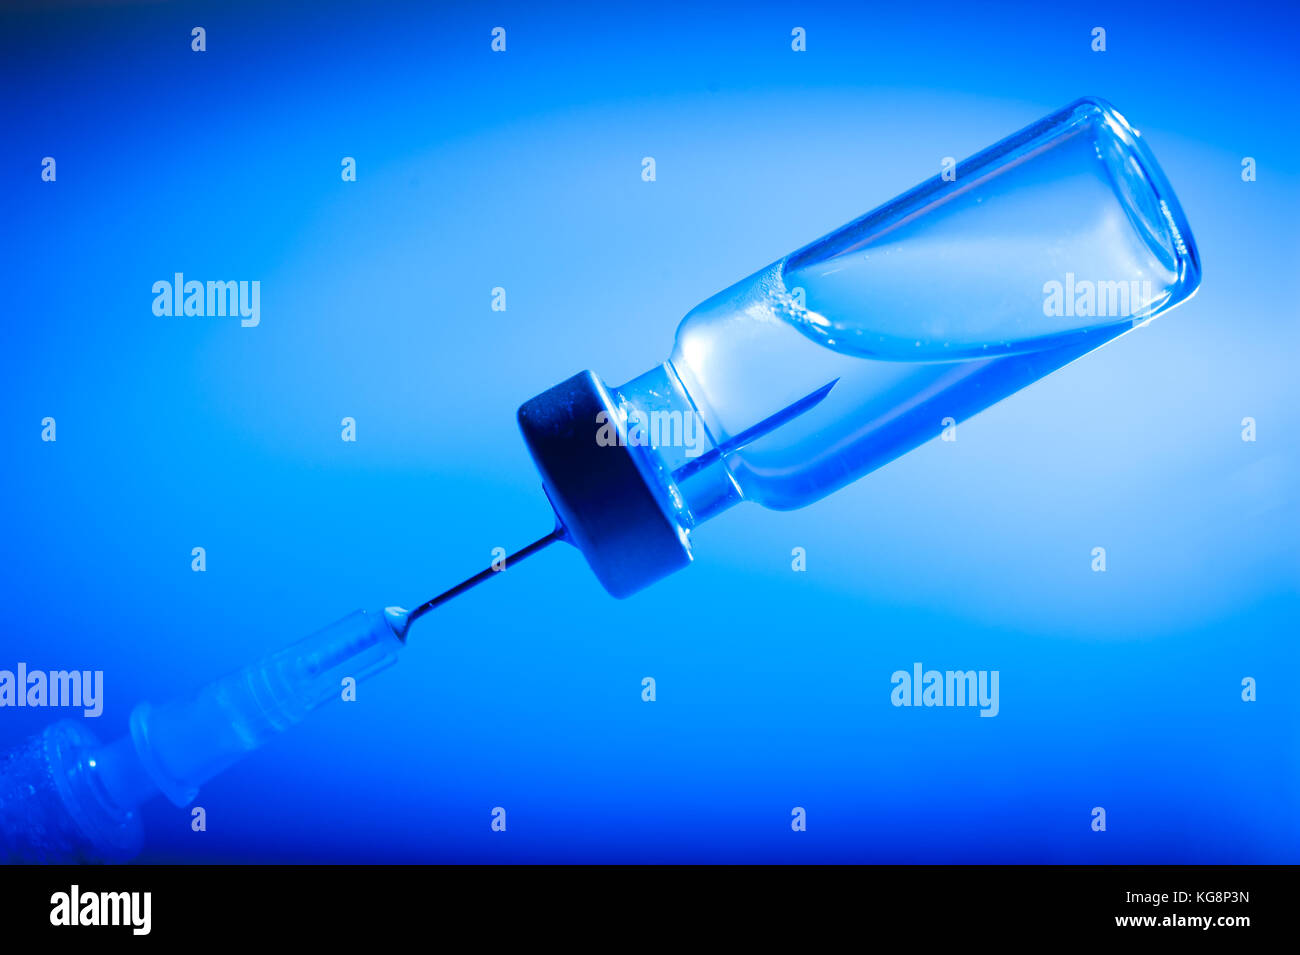 Preparation for vaccination, syringe filled with vaccine Stock Photo